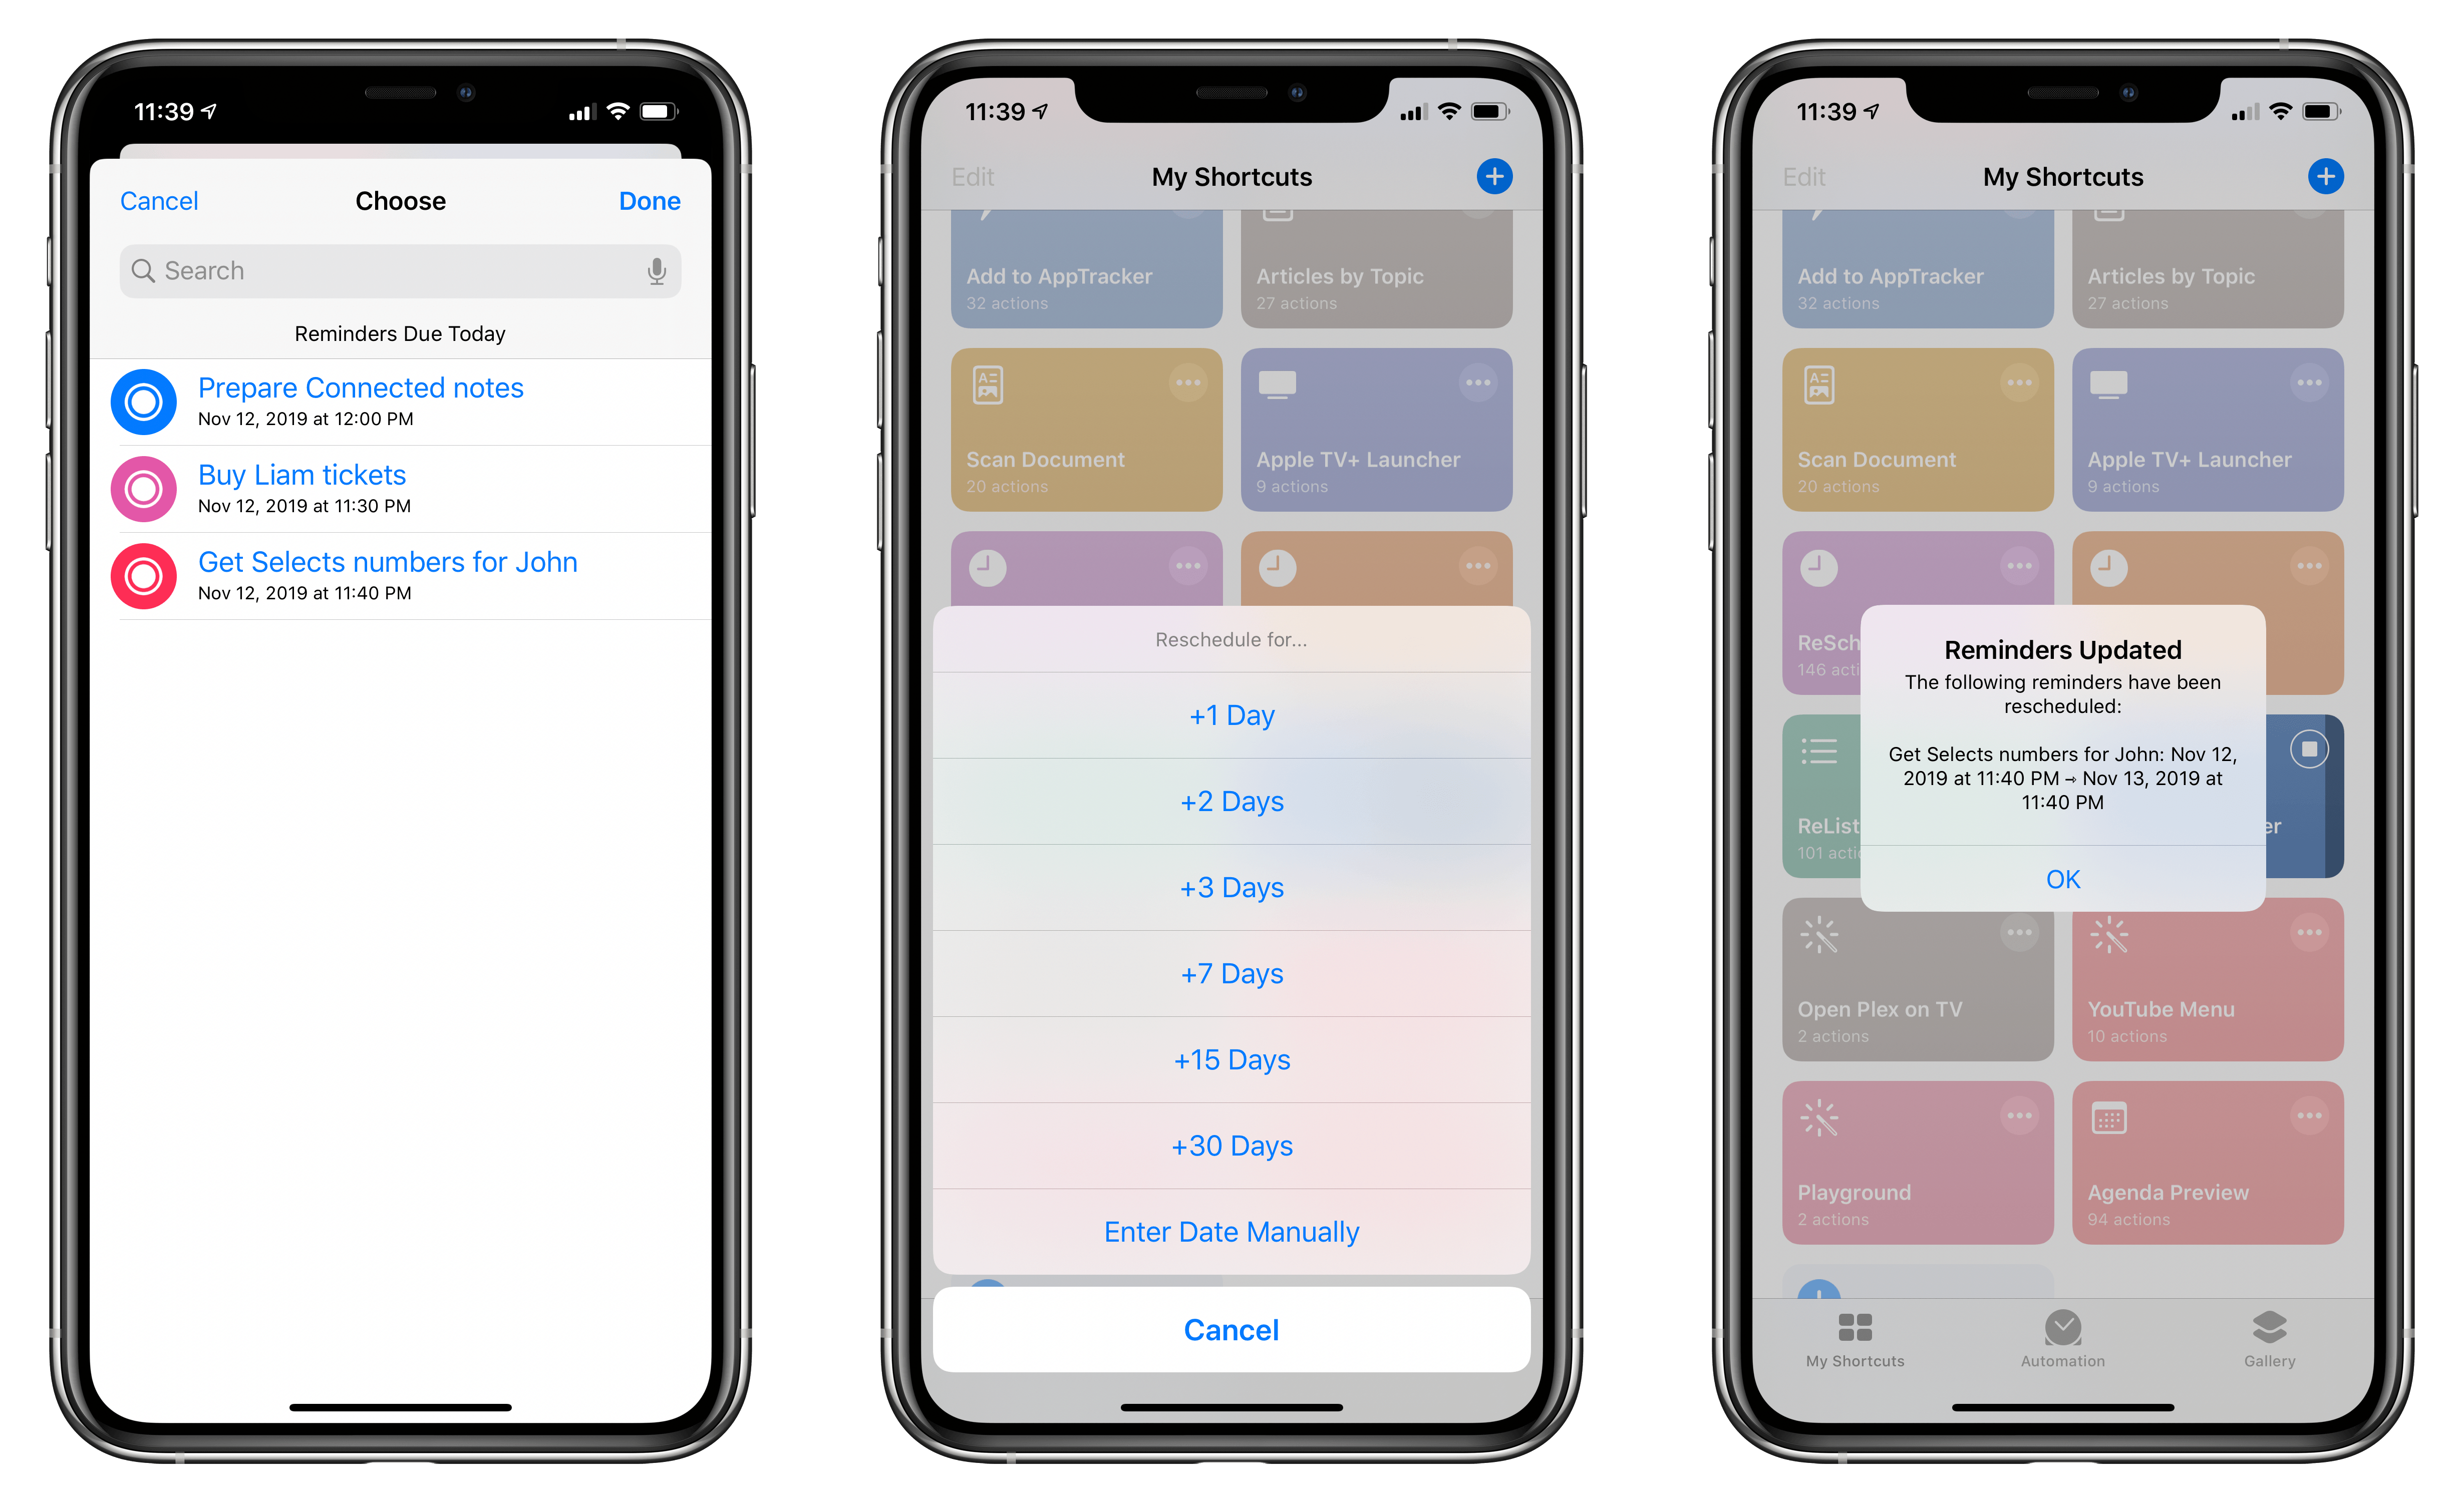 Rescheduling reminders with Shortcuts.